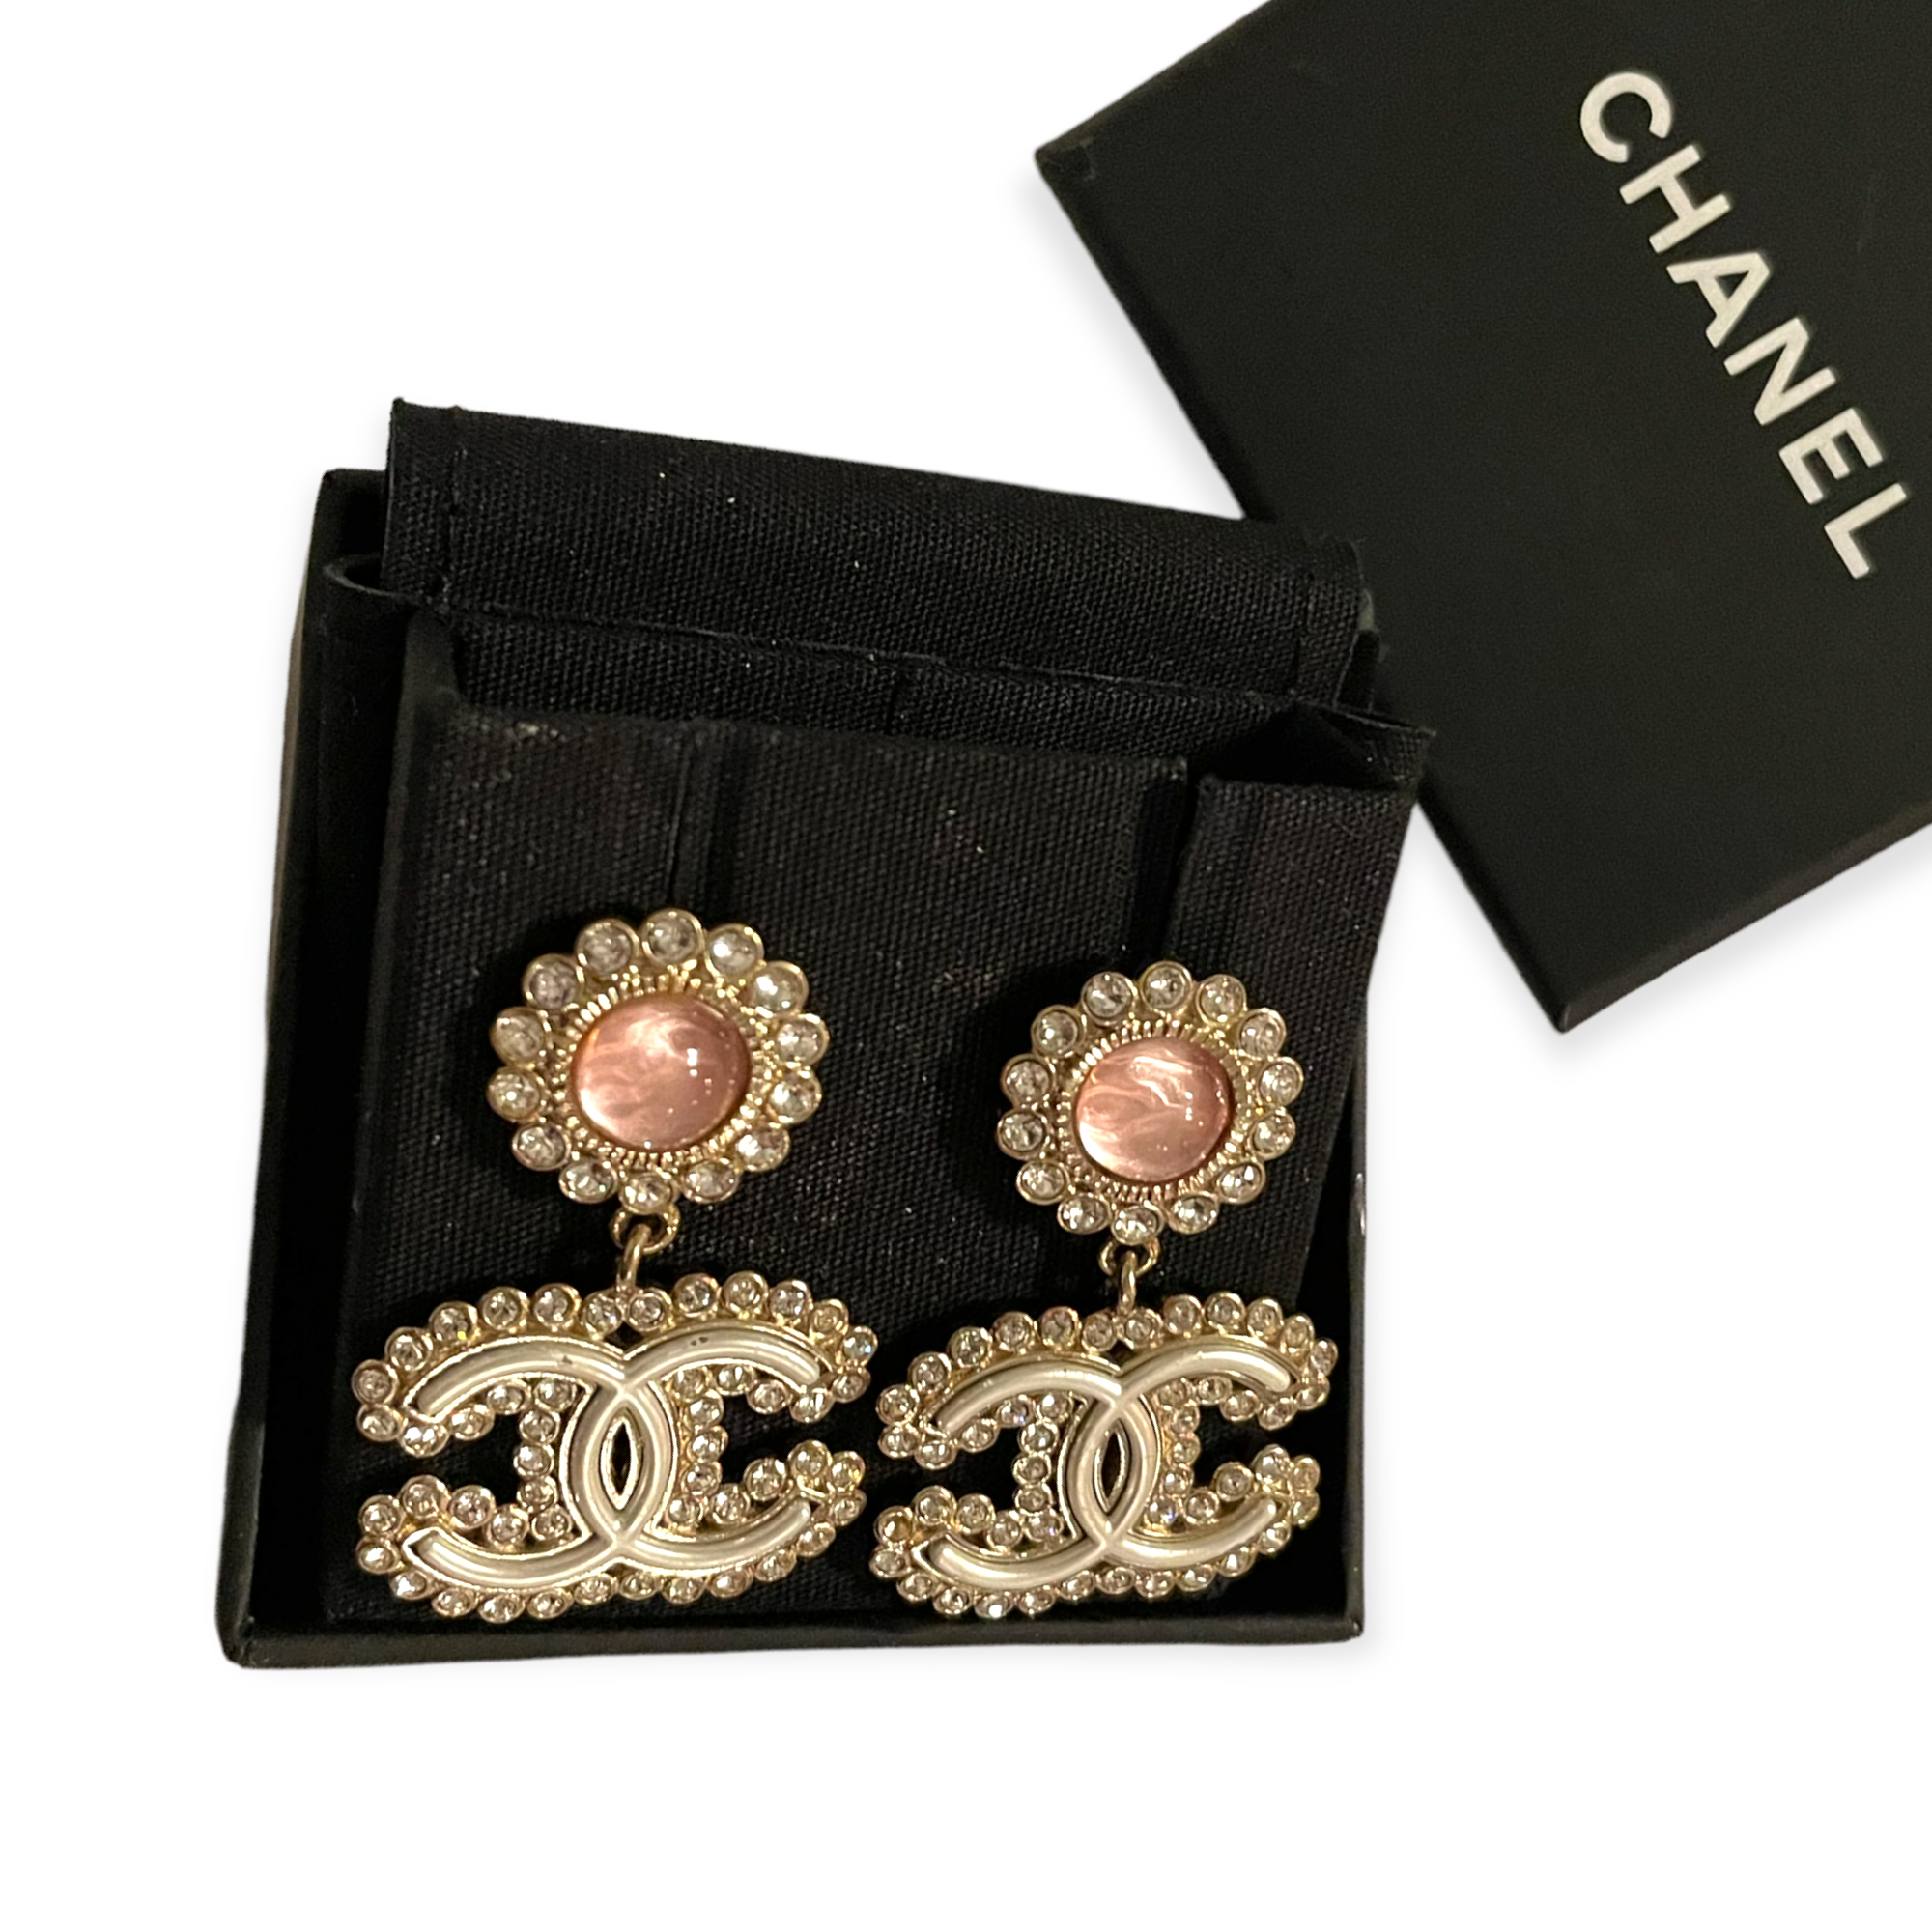 CHANEL Crystal CC Logo Drop with Pink Resin & Crystal Stud Dangling Earrings